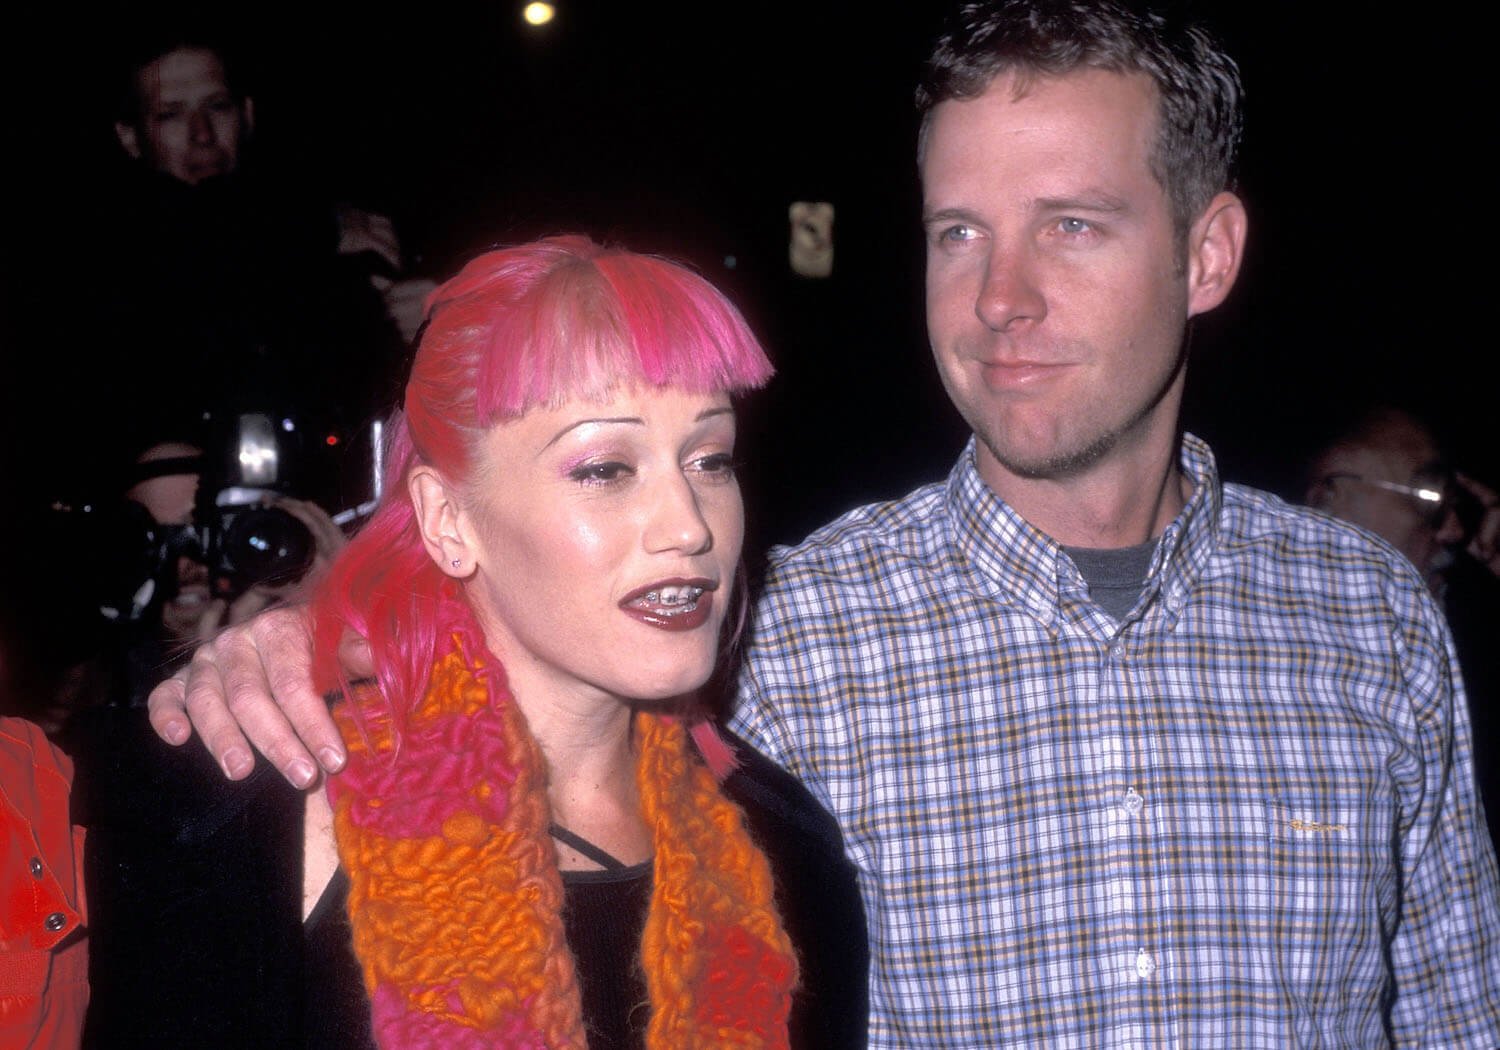 'The Voice' Season 24 coach Gwen Stefani in 1999 with pink hair and braces with musician Tom Dumont of No Doubt